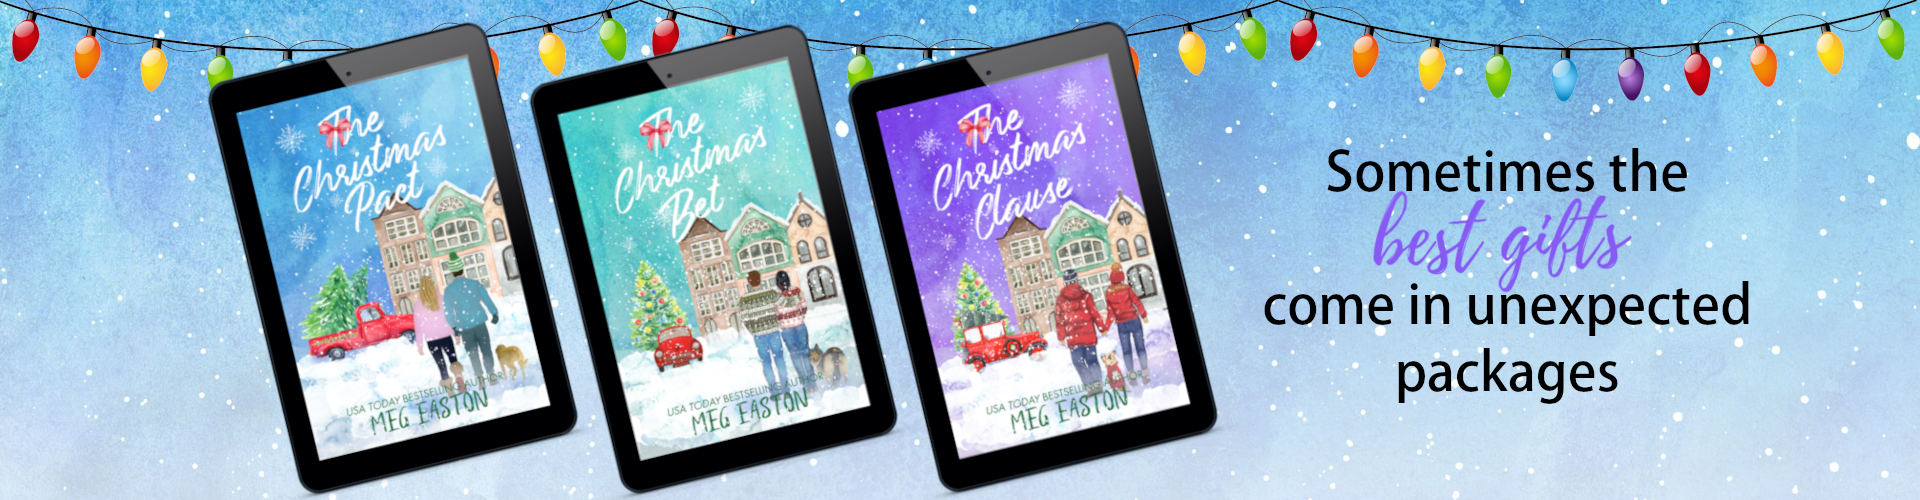 Book covers for A Mountain Springs Christmas